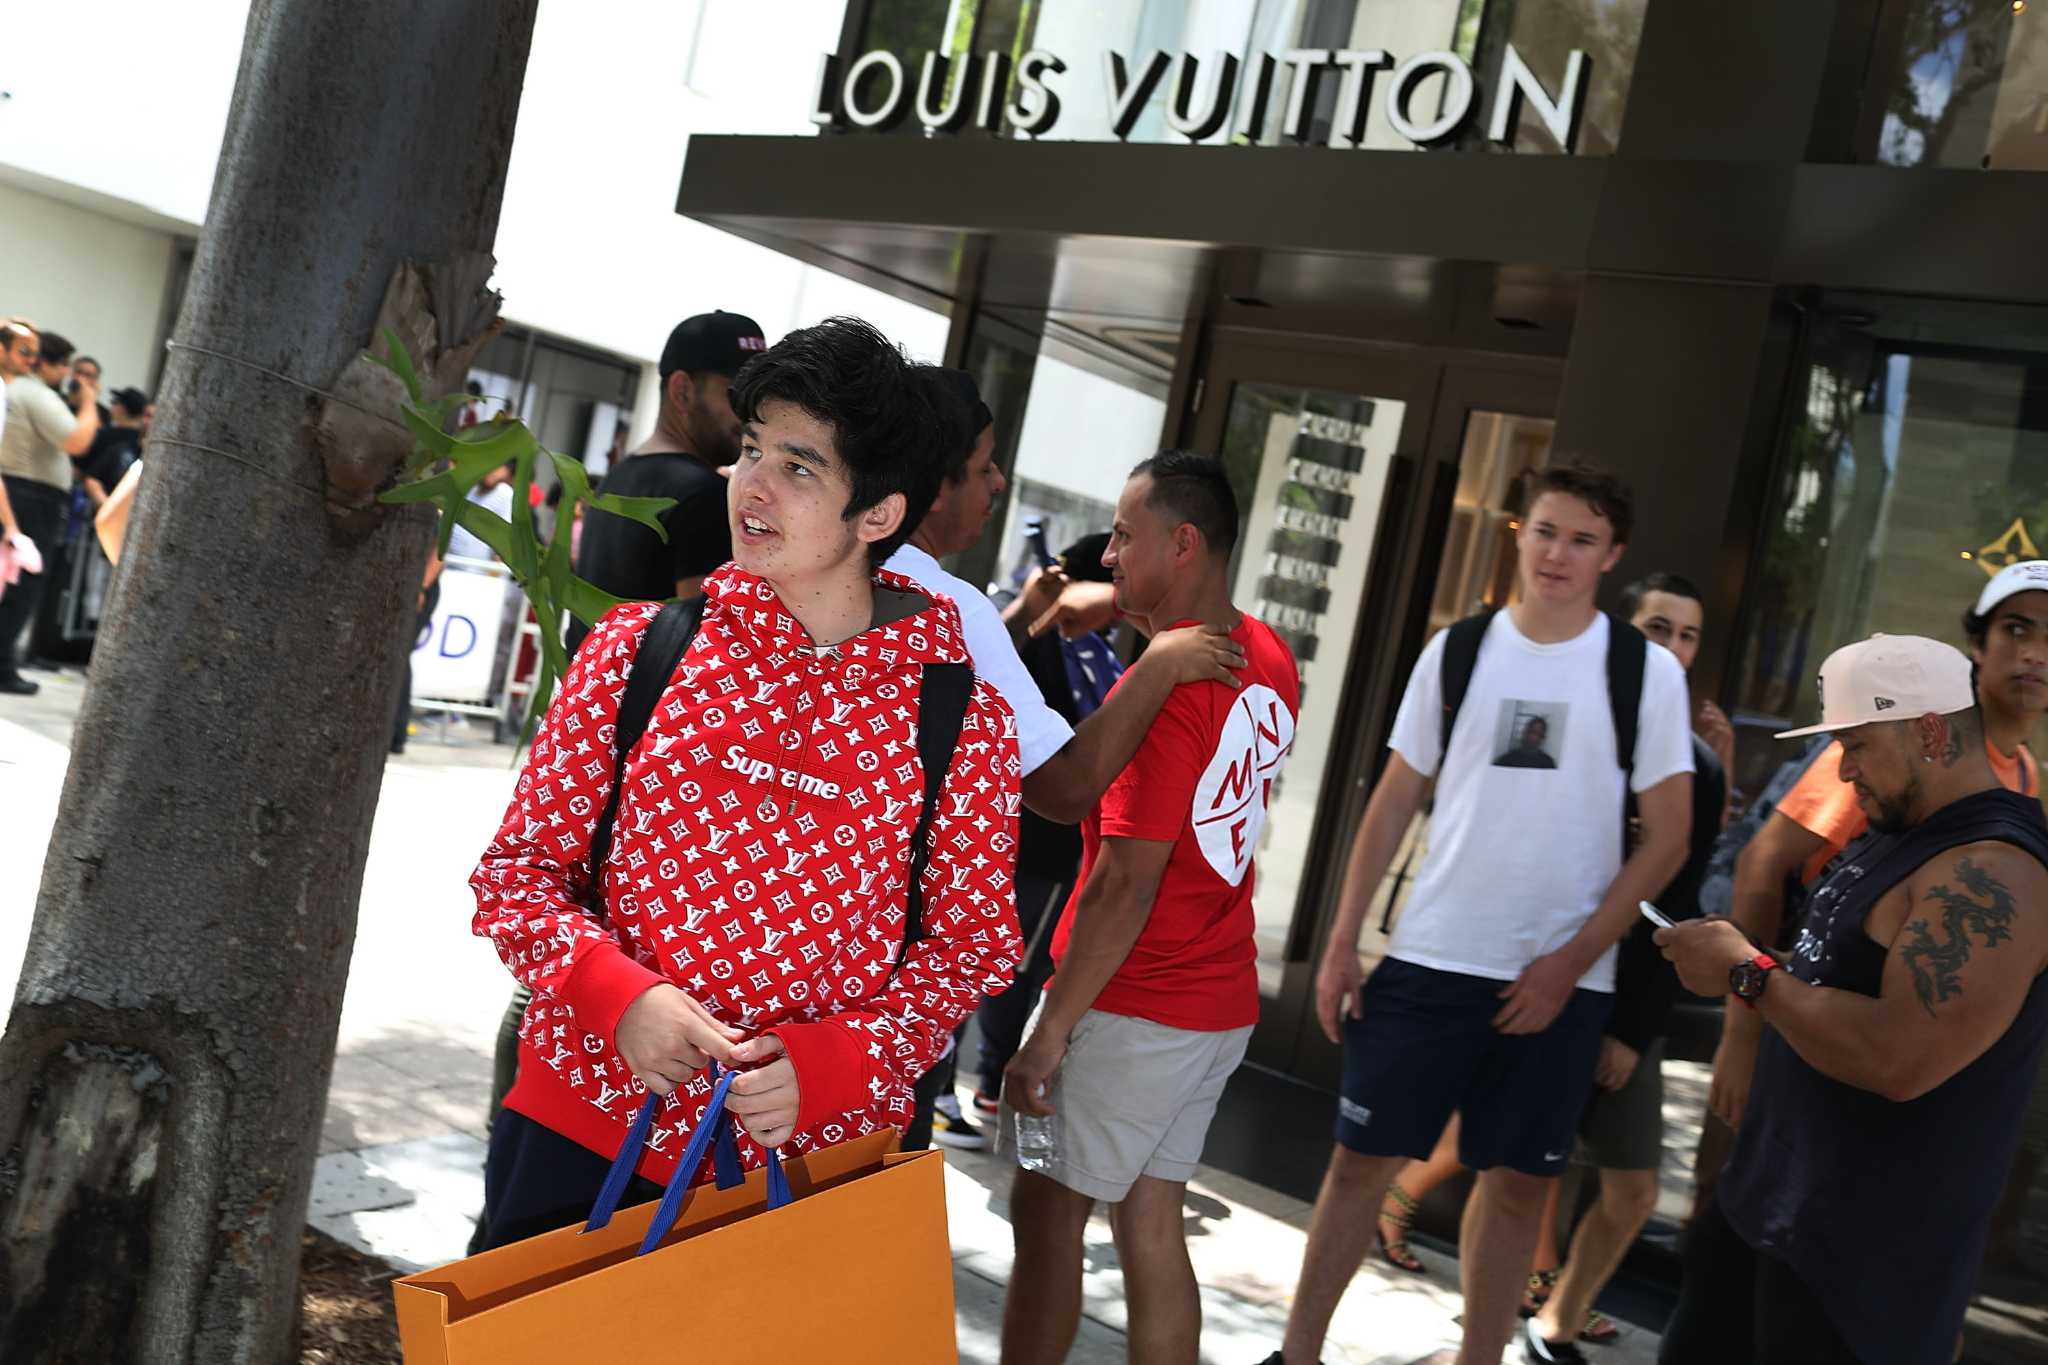 Pop-up potential draws a crowd hoping for Louis Vuitton streetwear  collaboration with Supreme